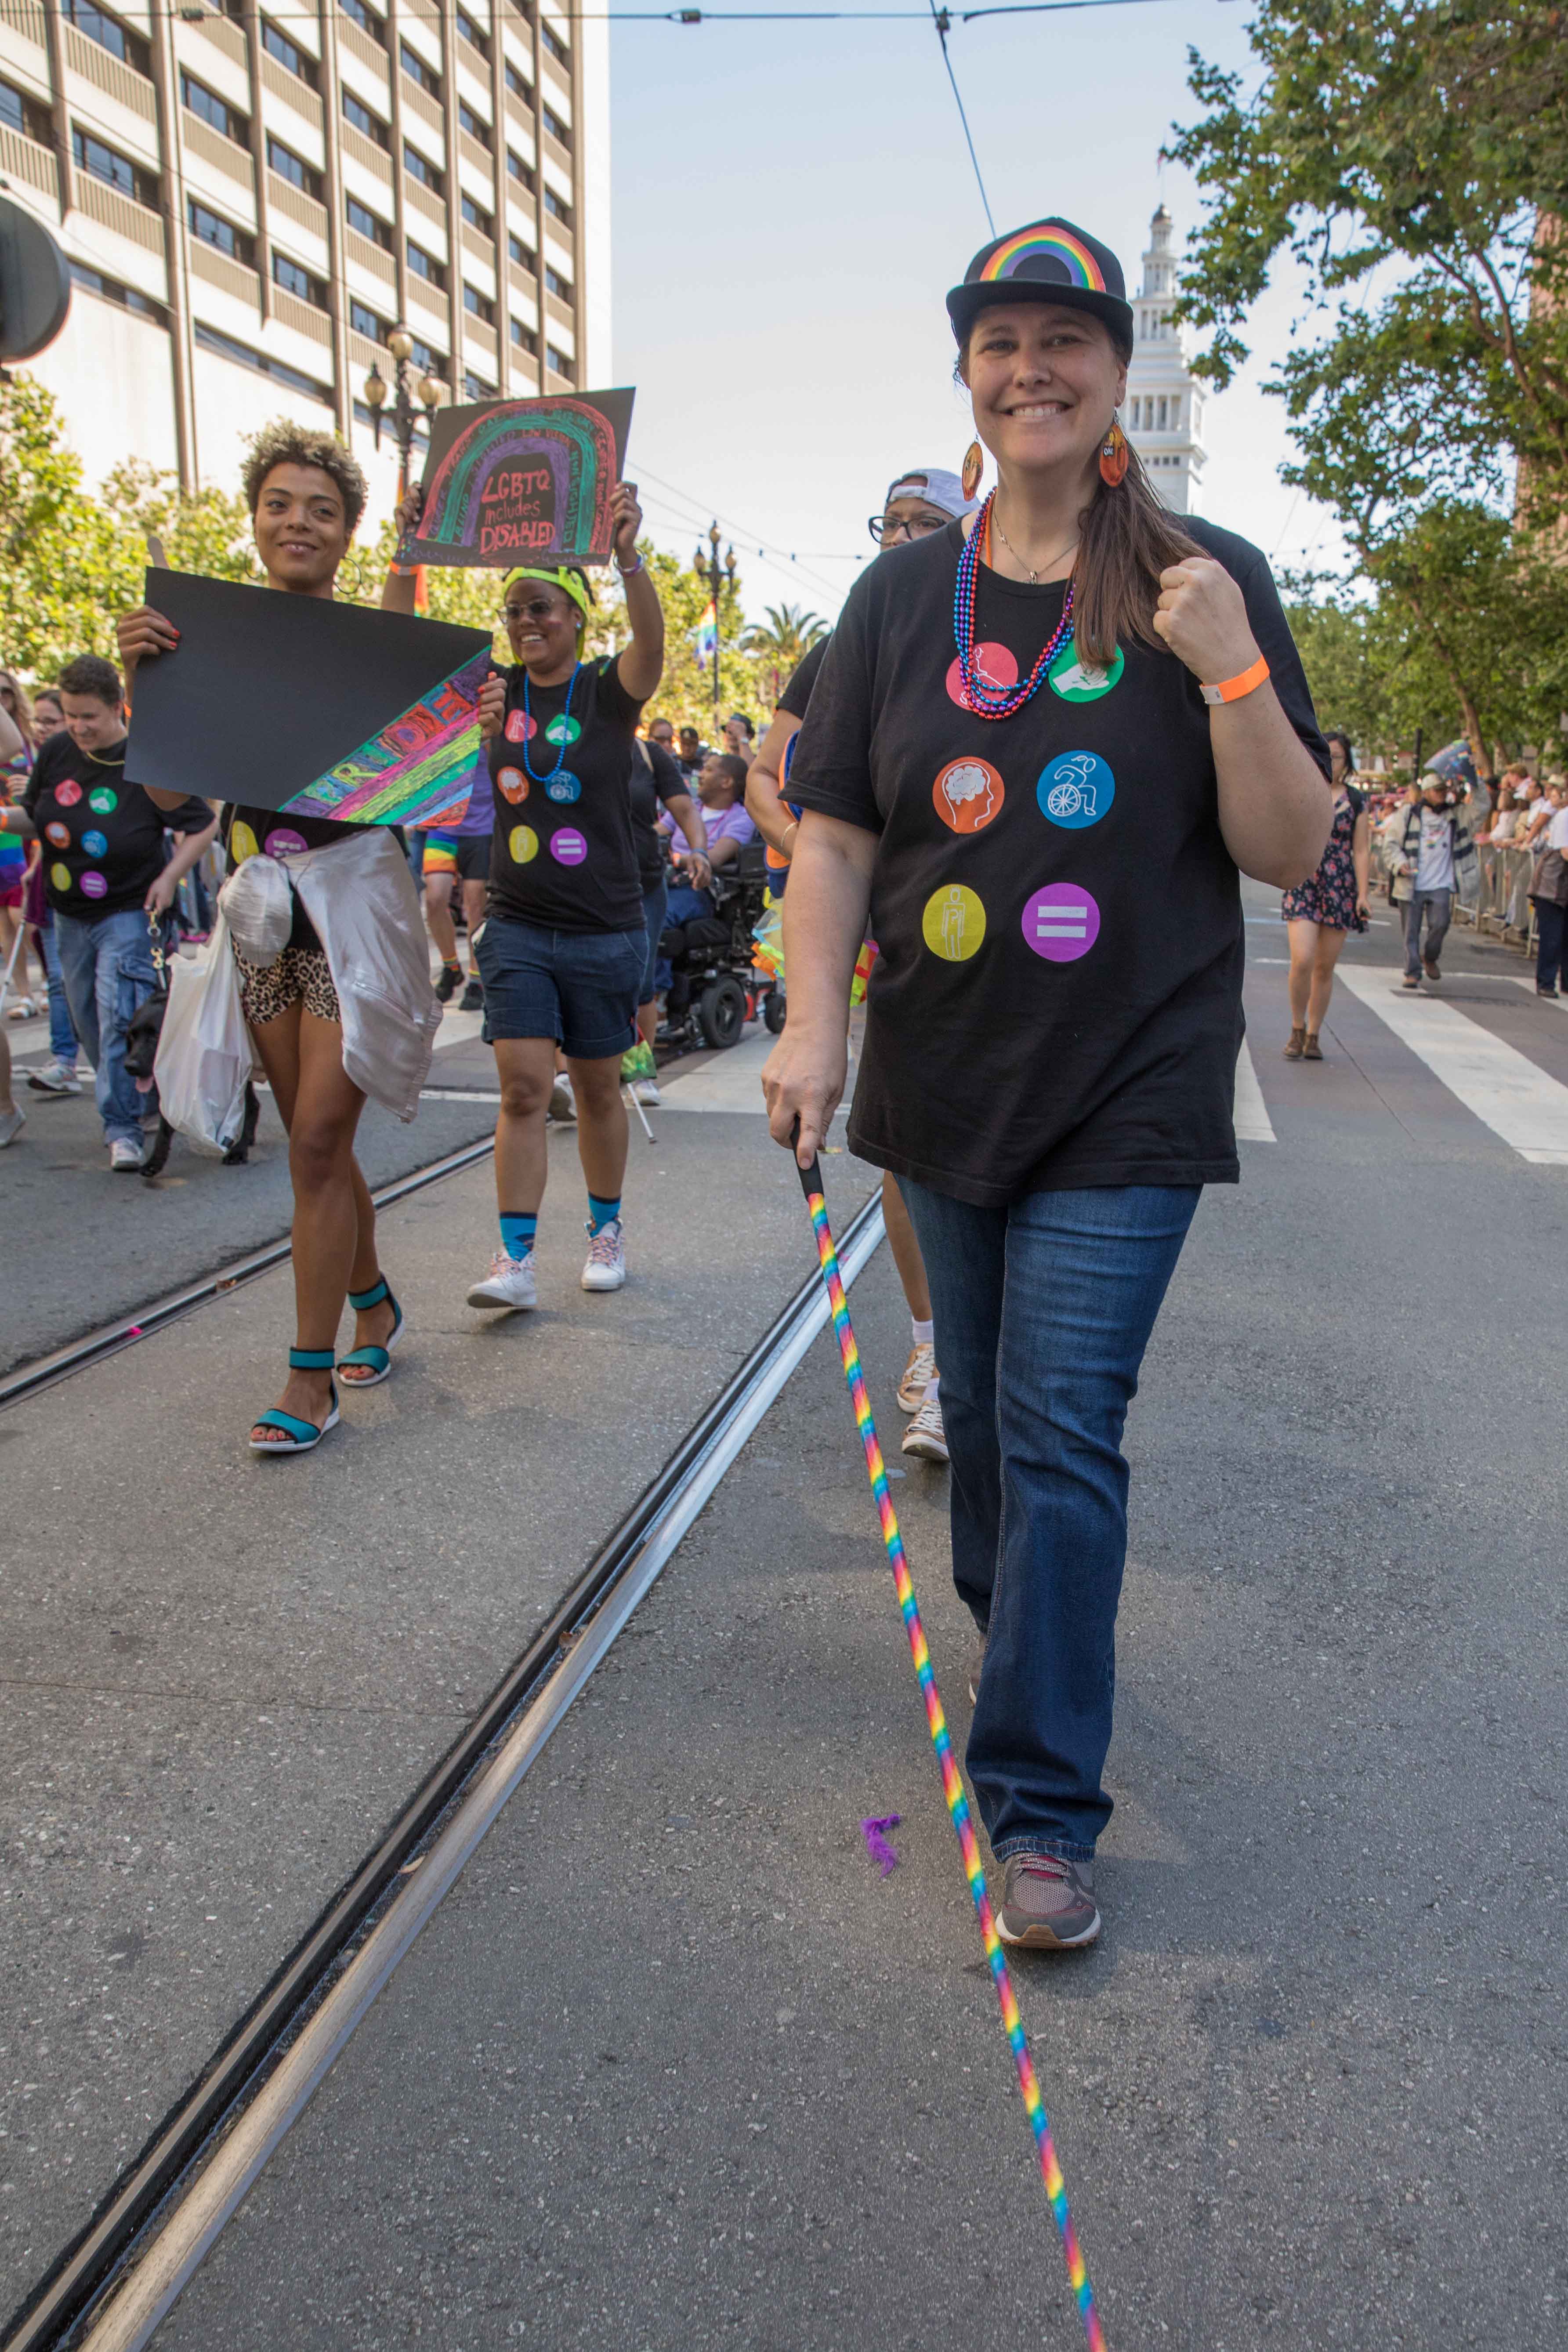 LightHouse Pride organizer Laura Millar smiles while marching, with her white cane wrapped in rainbow ribbon.